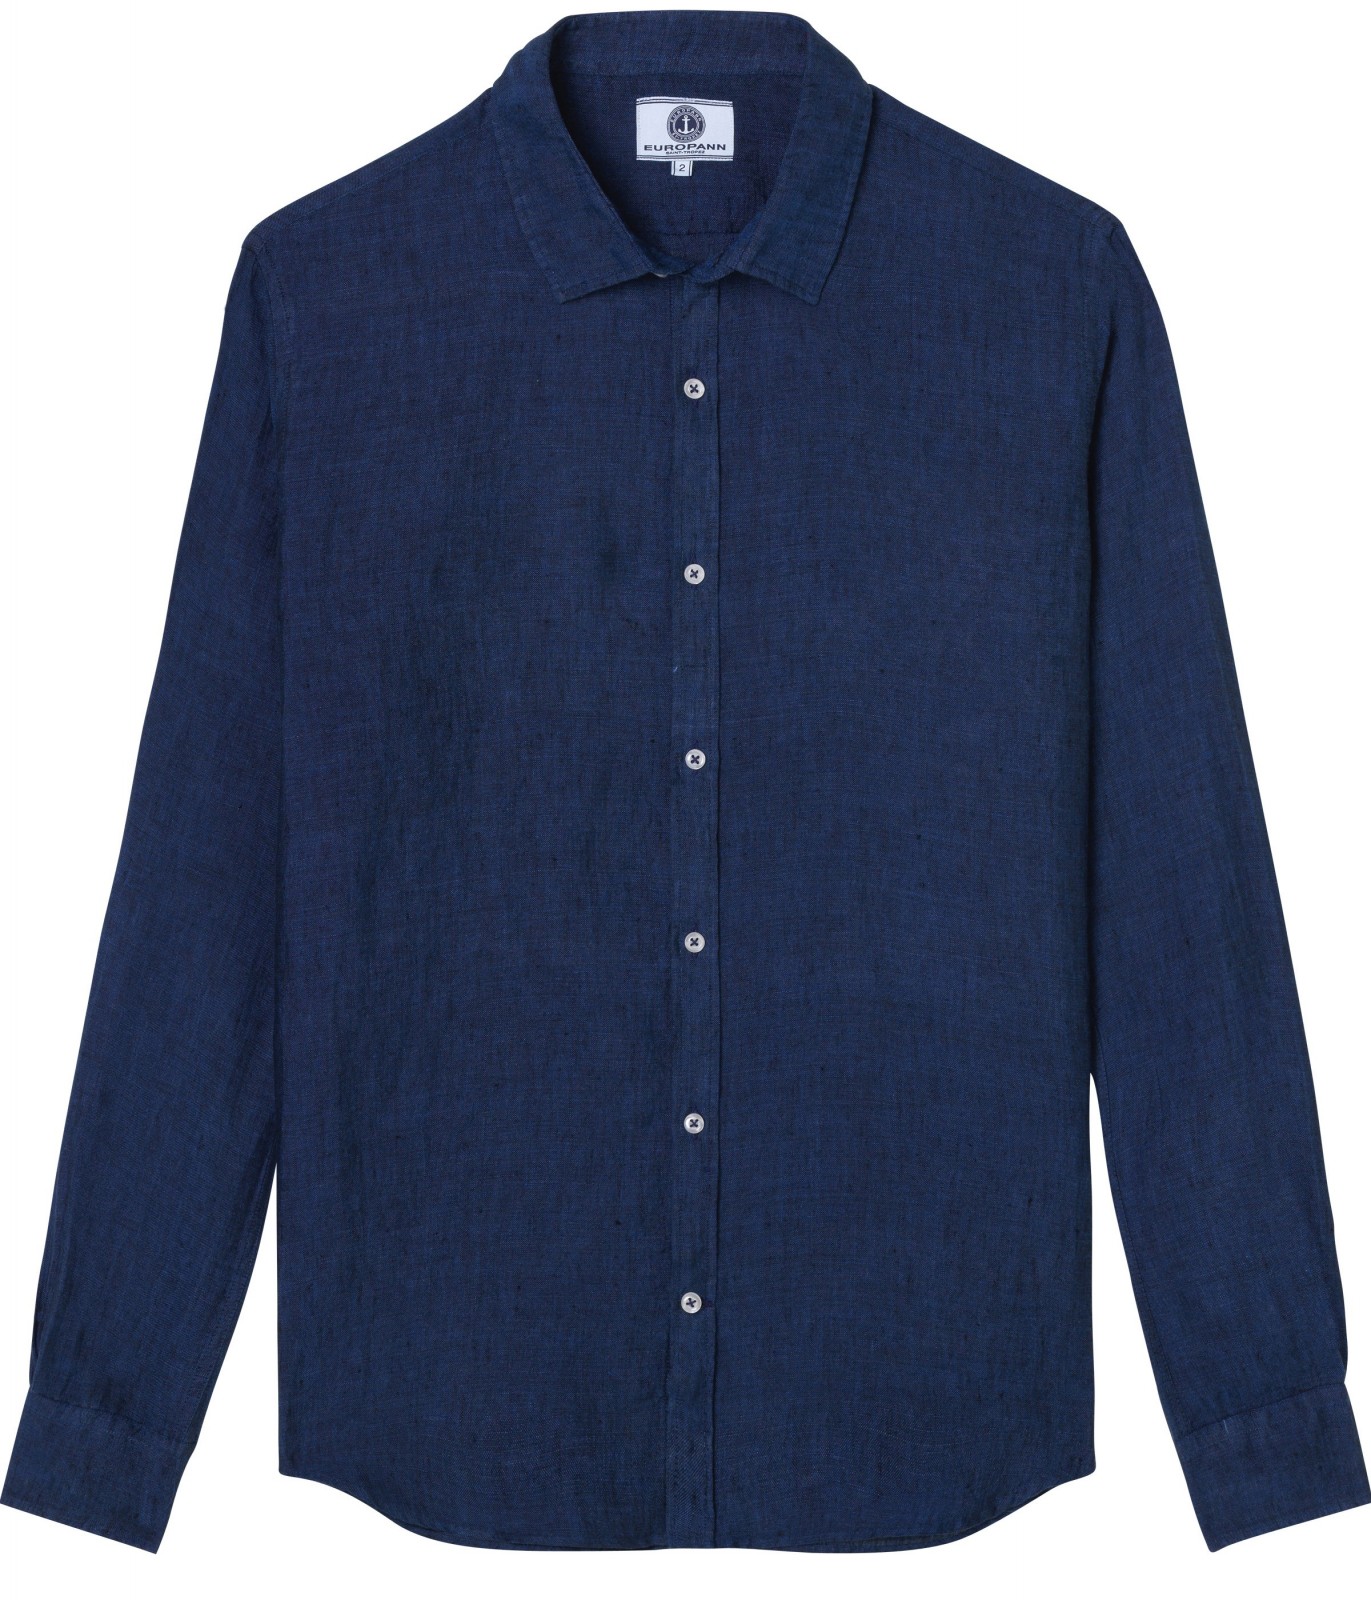 Plain navy blue color long sleeves ...